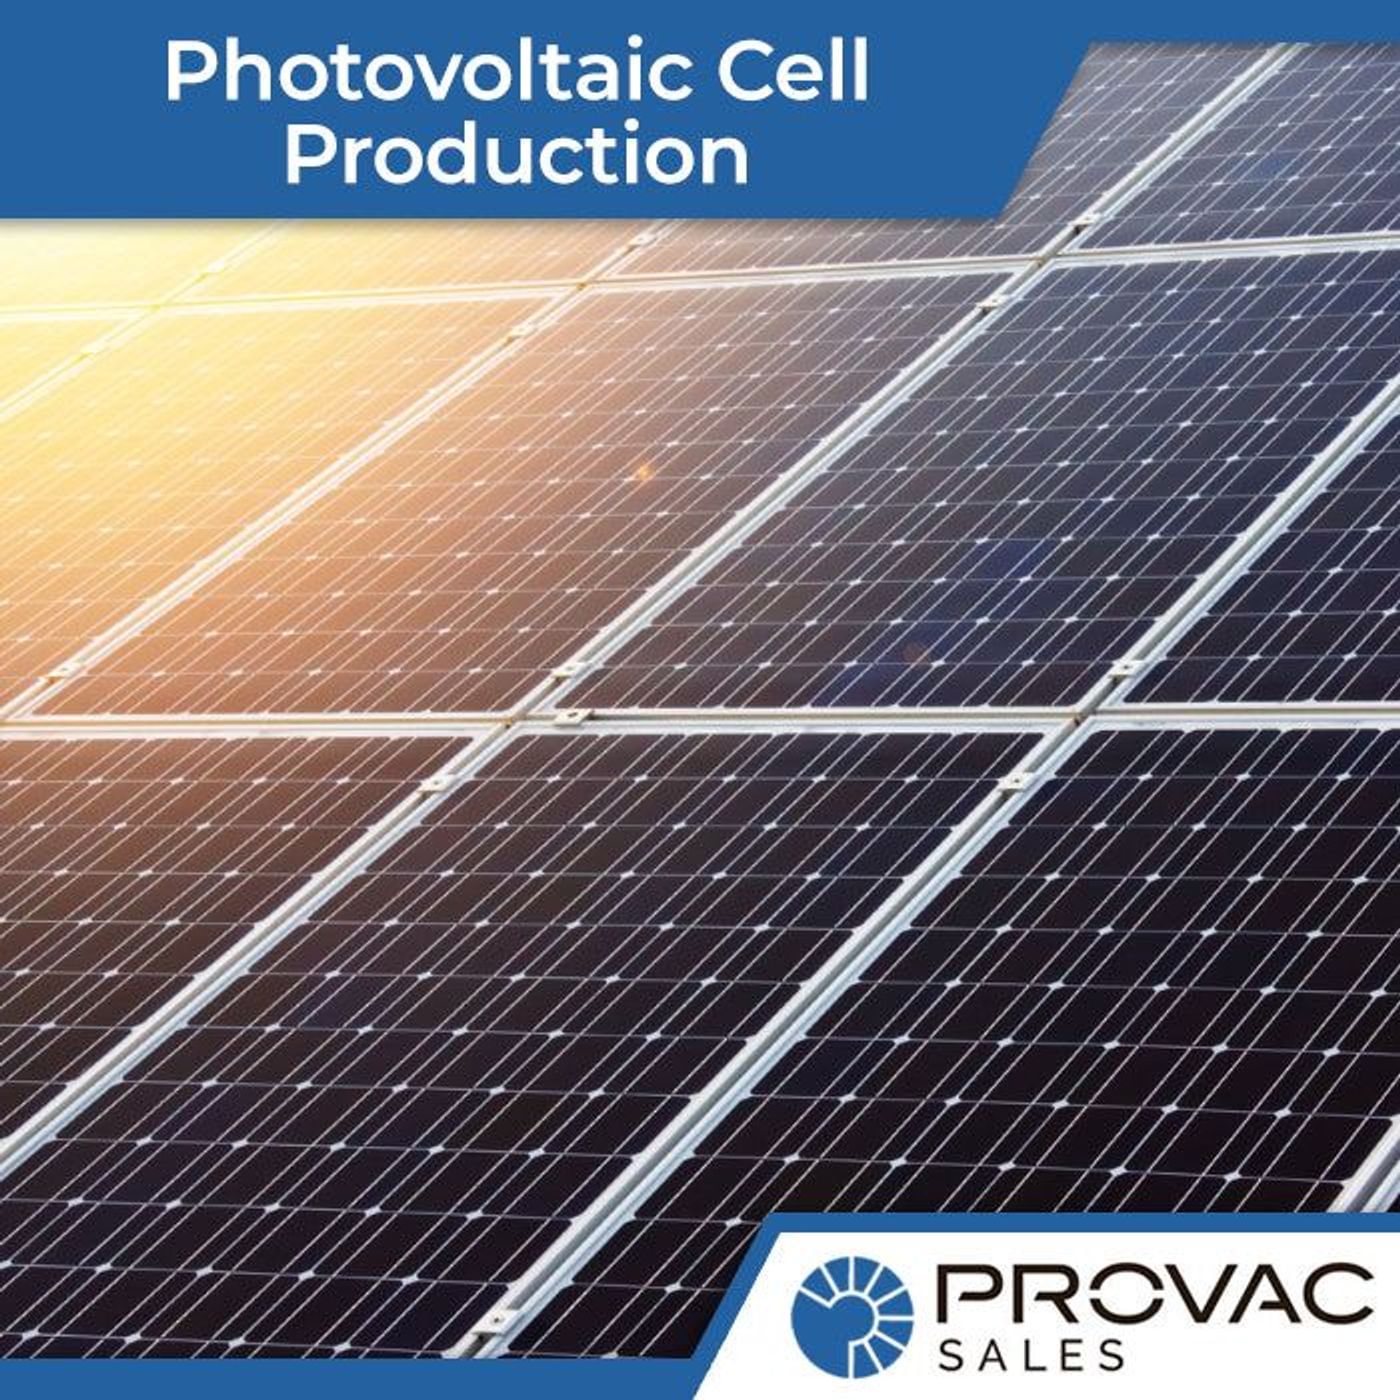 The Use of Vacuum Pumps in Photovoltaic Cell Production